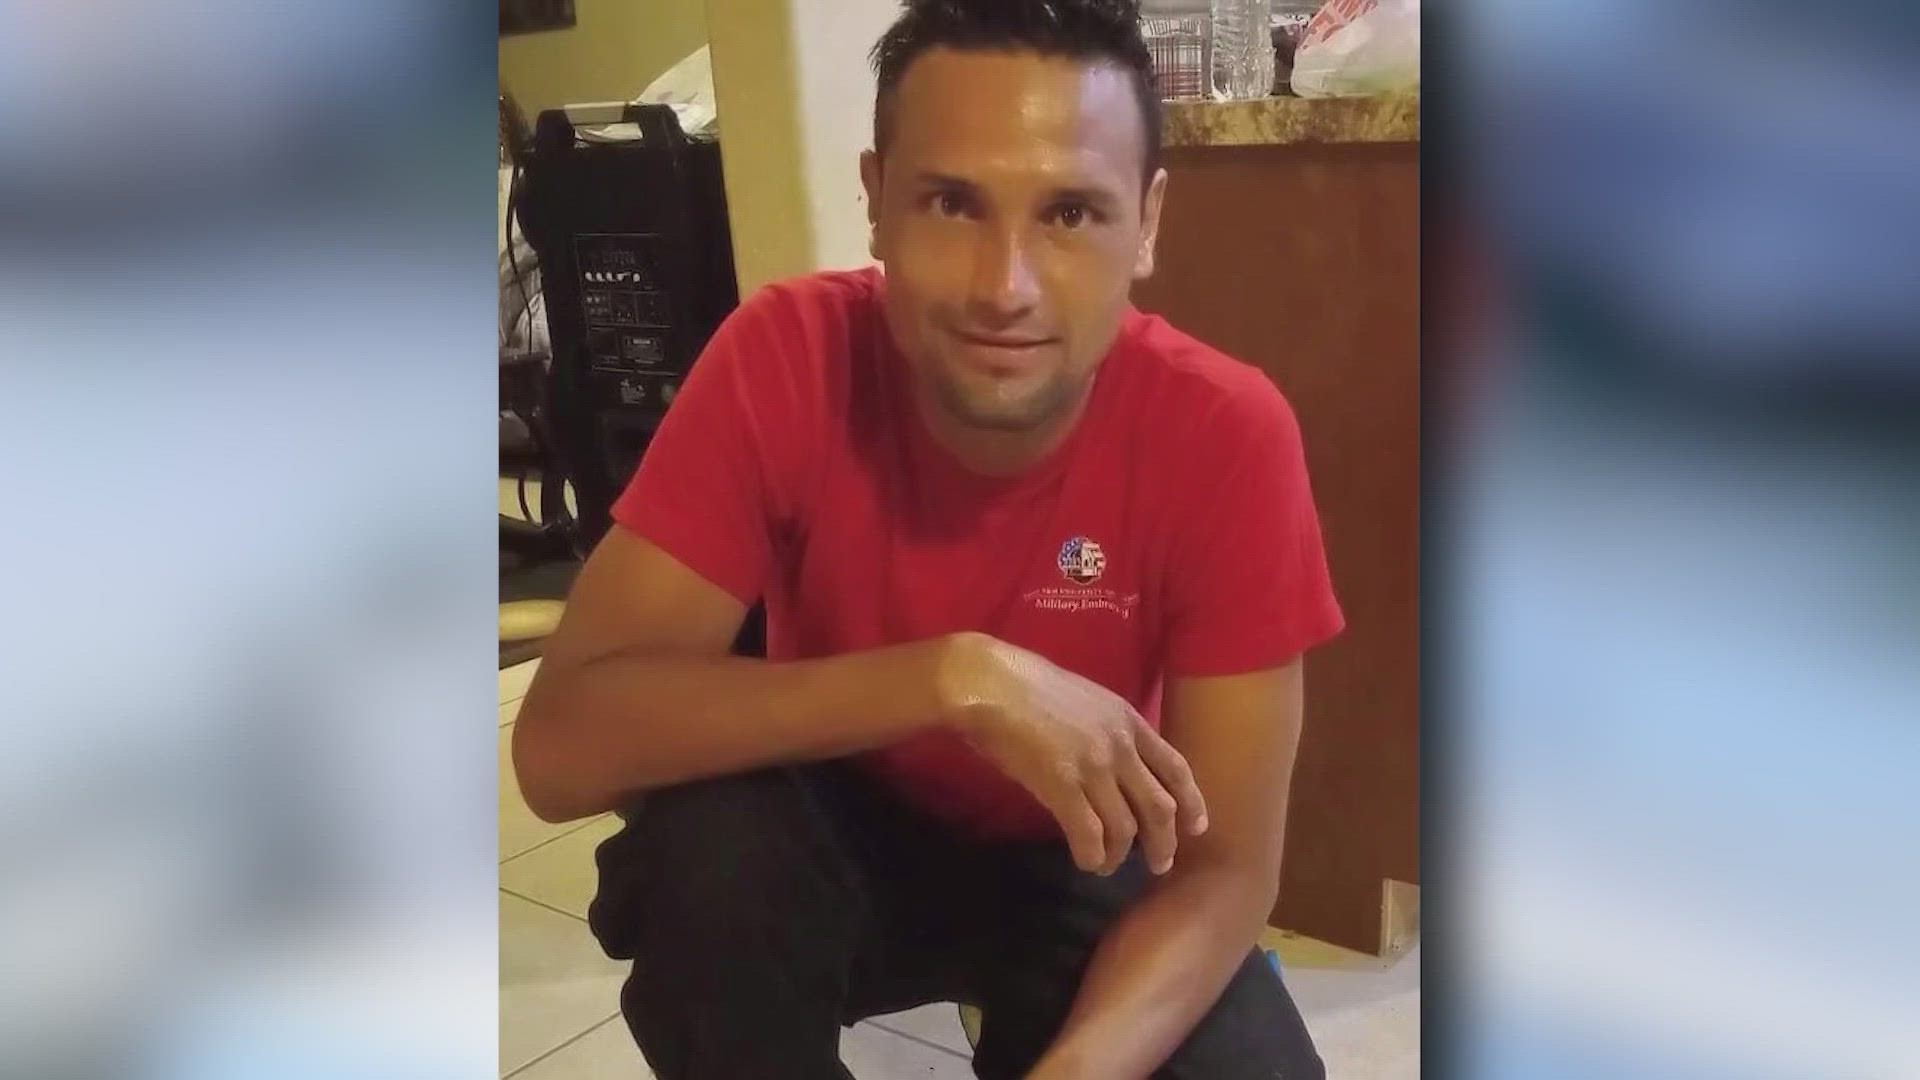 The family of Eloy Hernandez is mourning after he was shot to death. Police hope witnesses recognize a man in surveillance footage.